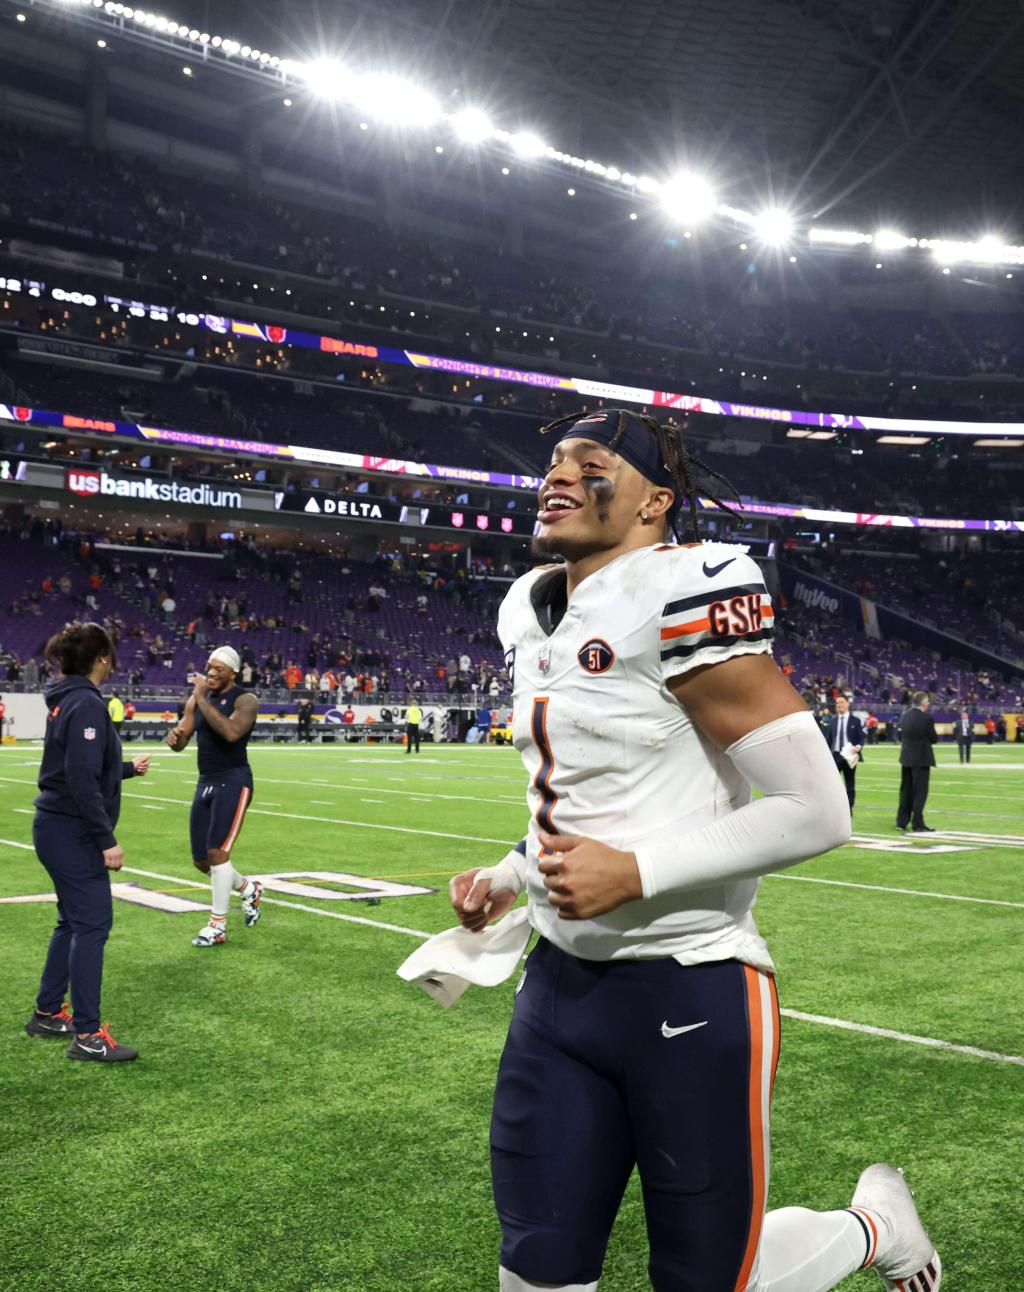 ‘Tunnel vision.’ With a clutch completion, Chicago Bears QB Justin Fields finished a sloppy night with a signature win. – Boston Herald